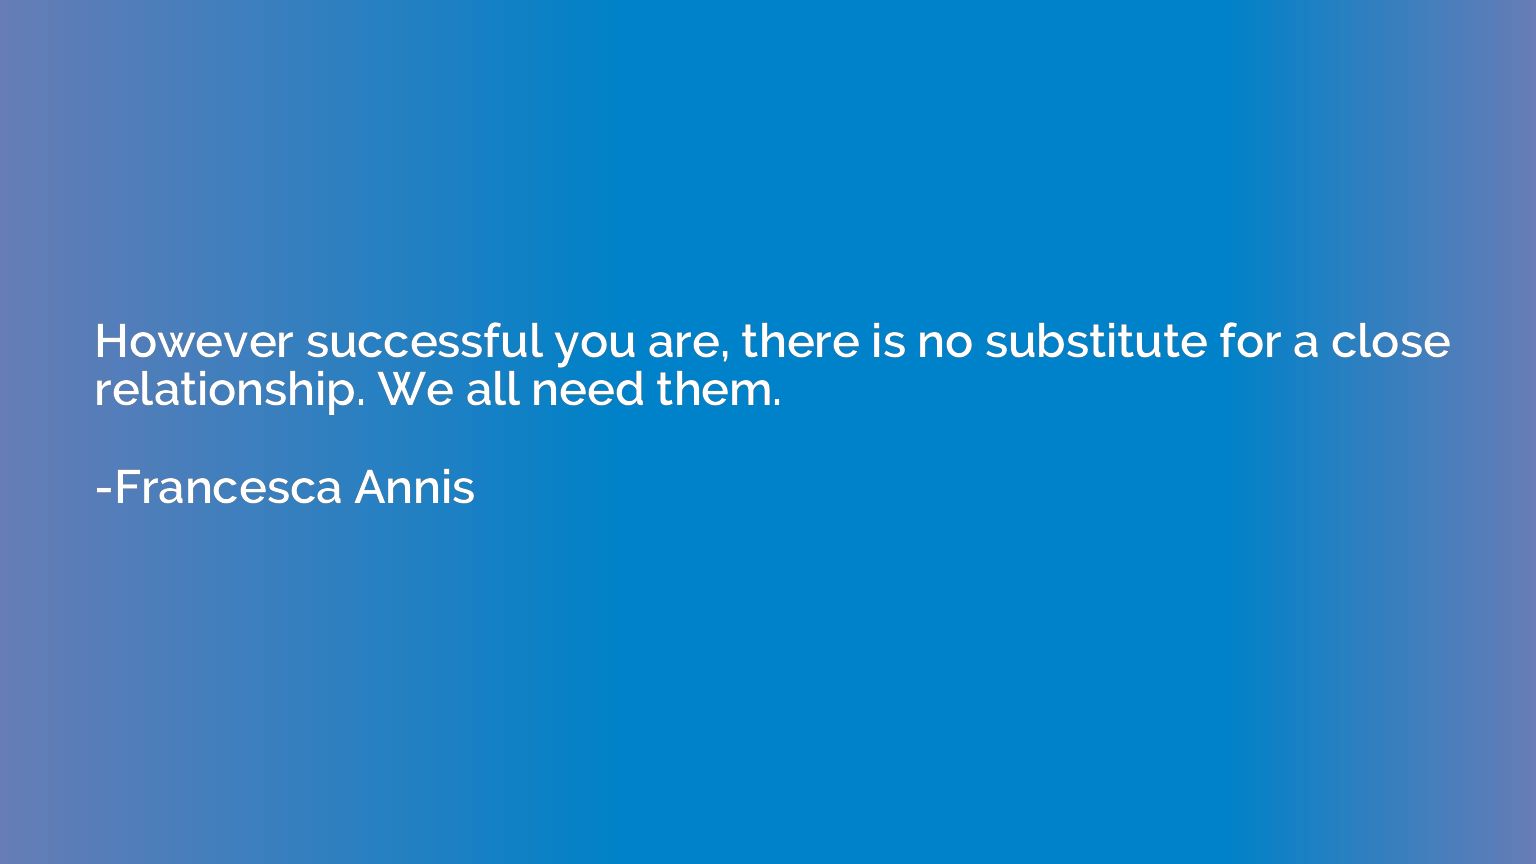 However successful you are, there is no substitute for a clo